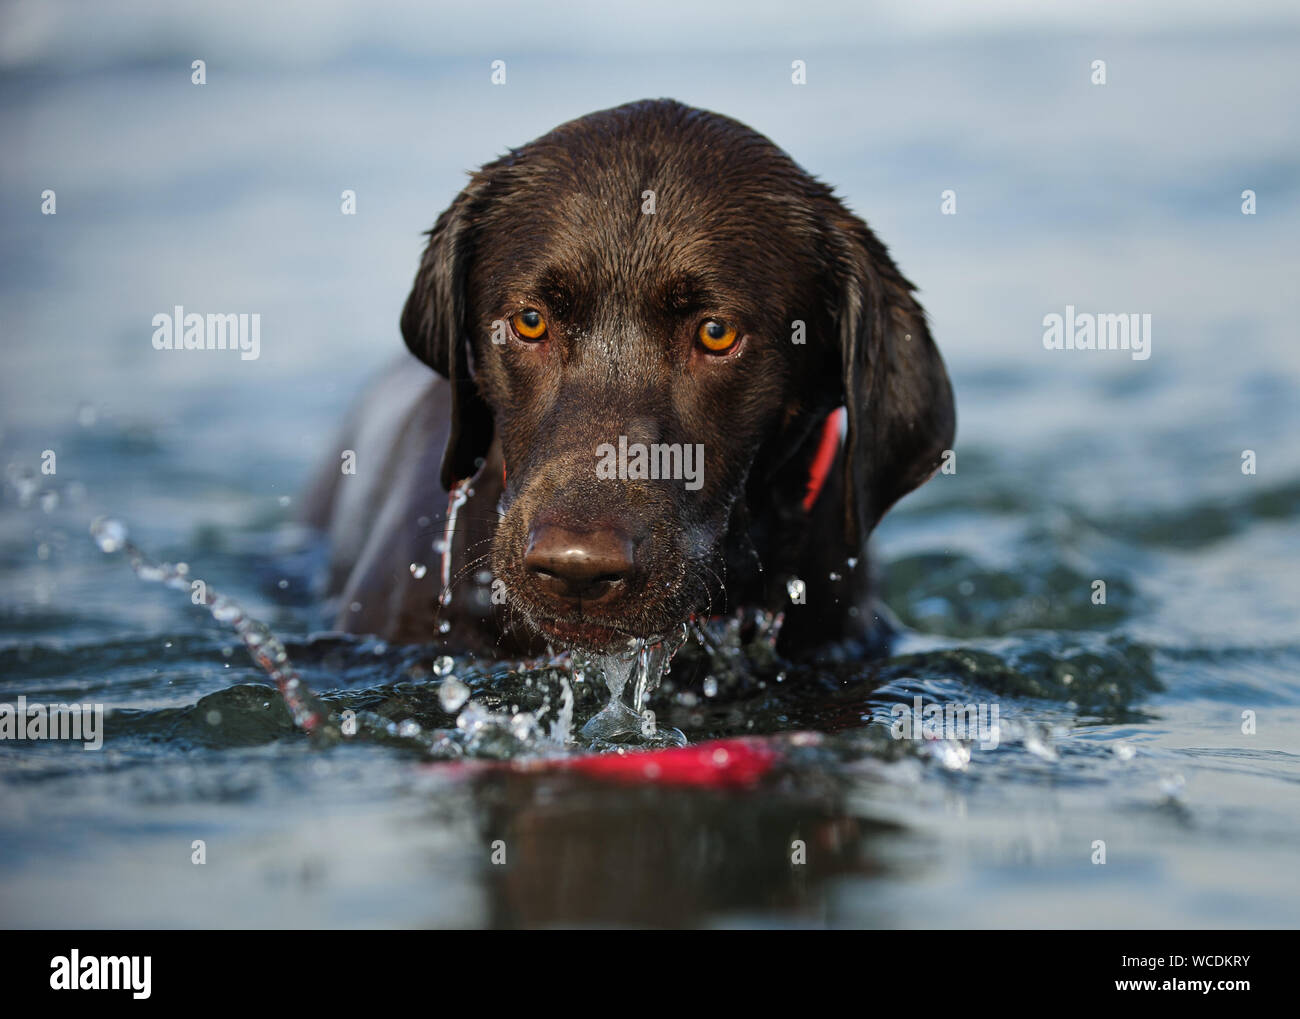 View Of Contemplative Chocolate Retriever In Water Stock Photo